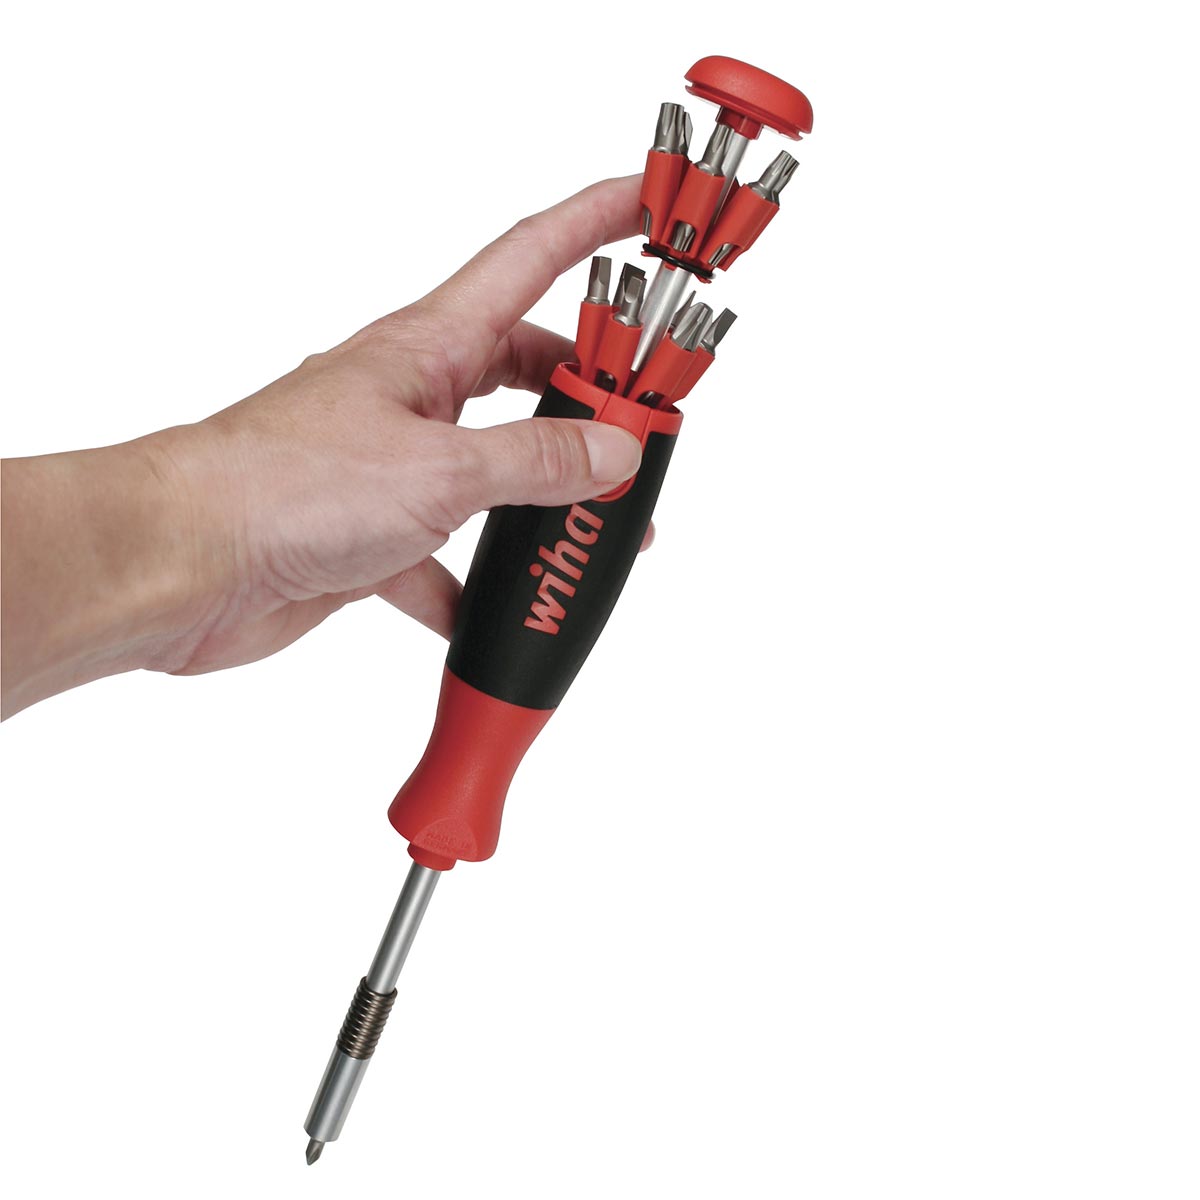 Wiha Technicians 26-in-1 Ultra Driver With Softgrip Handle (14 Piece Set)